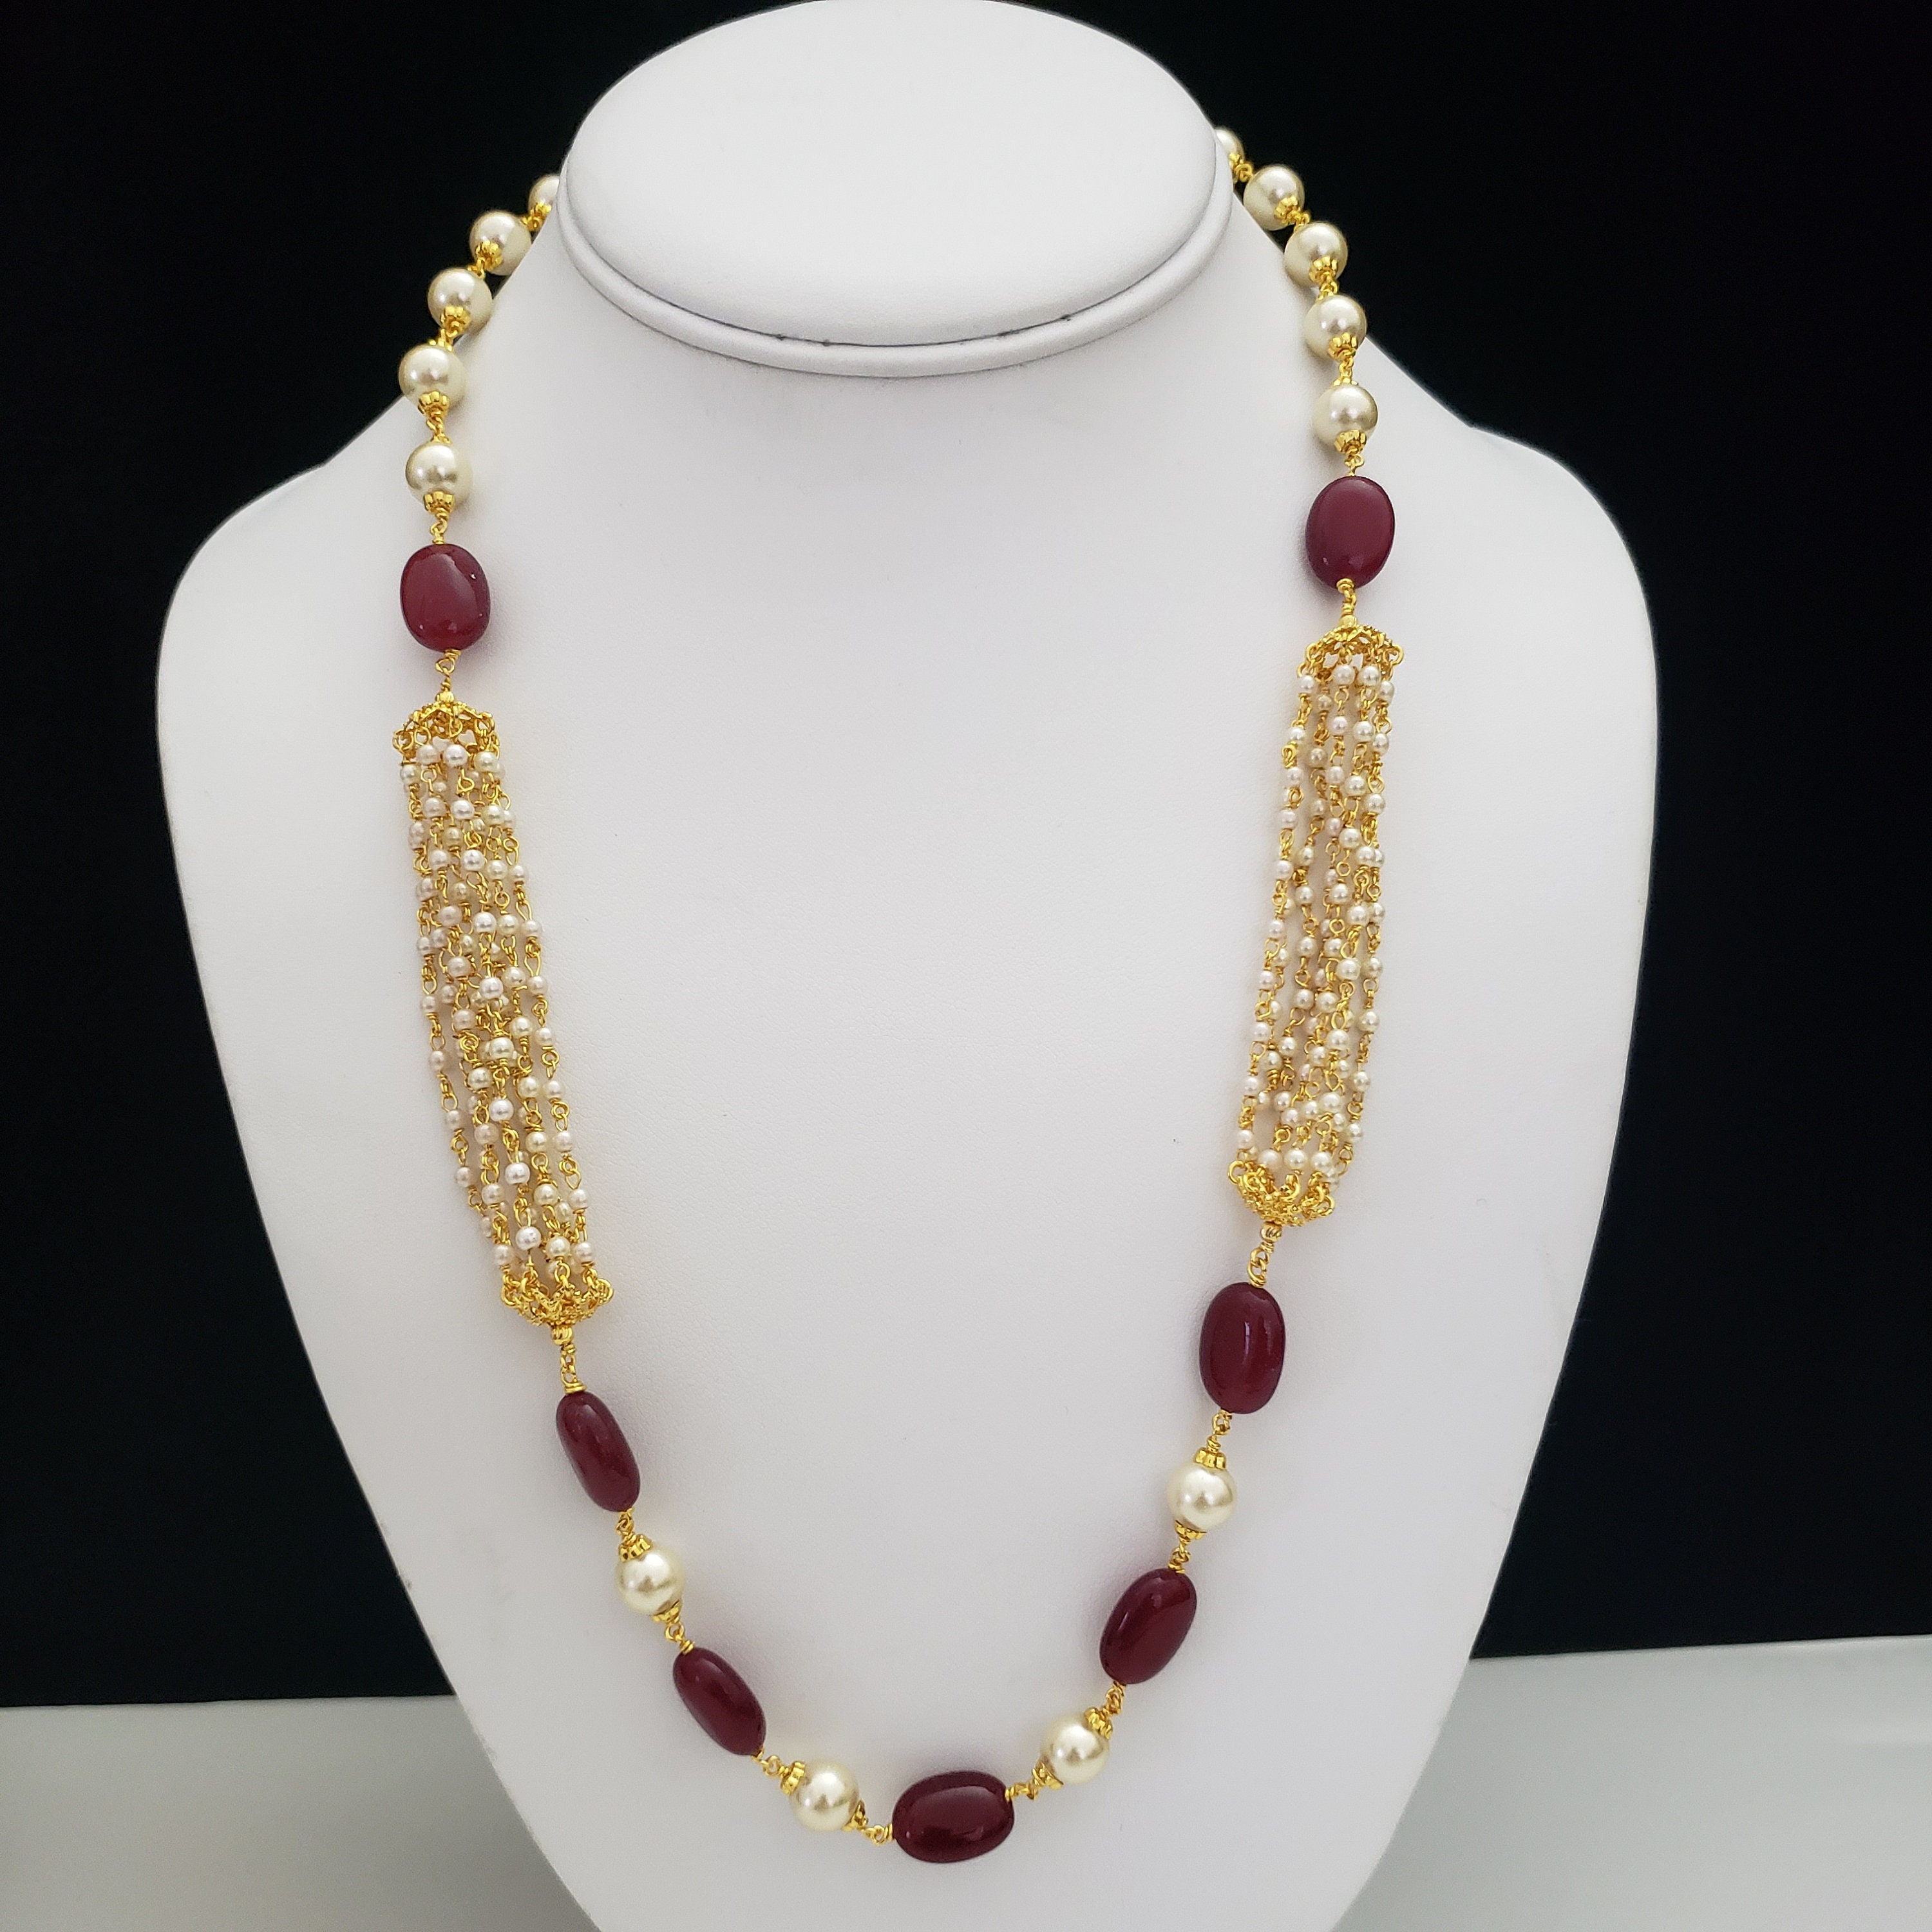 Maroon Beads Necklace High Quality Semi Precious Beads and - Etsy